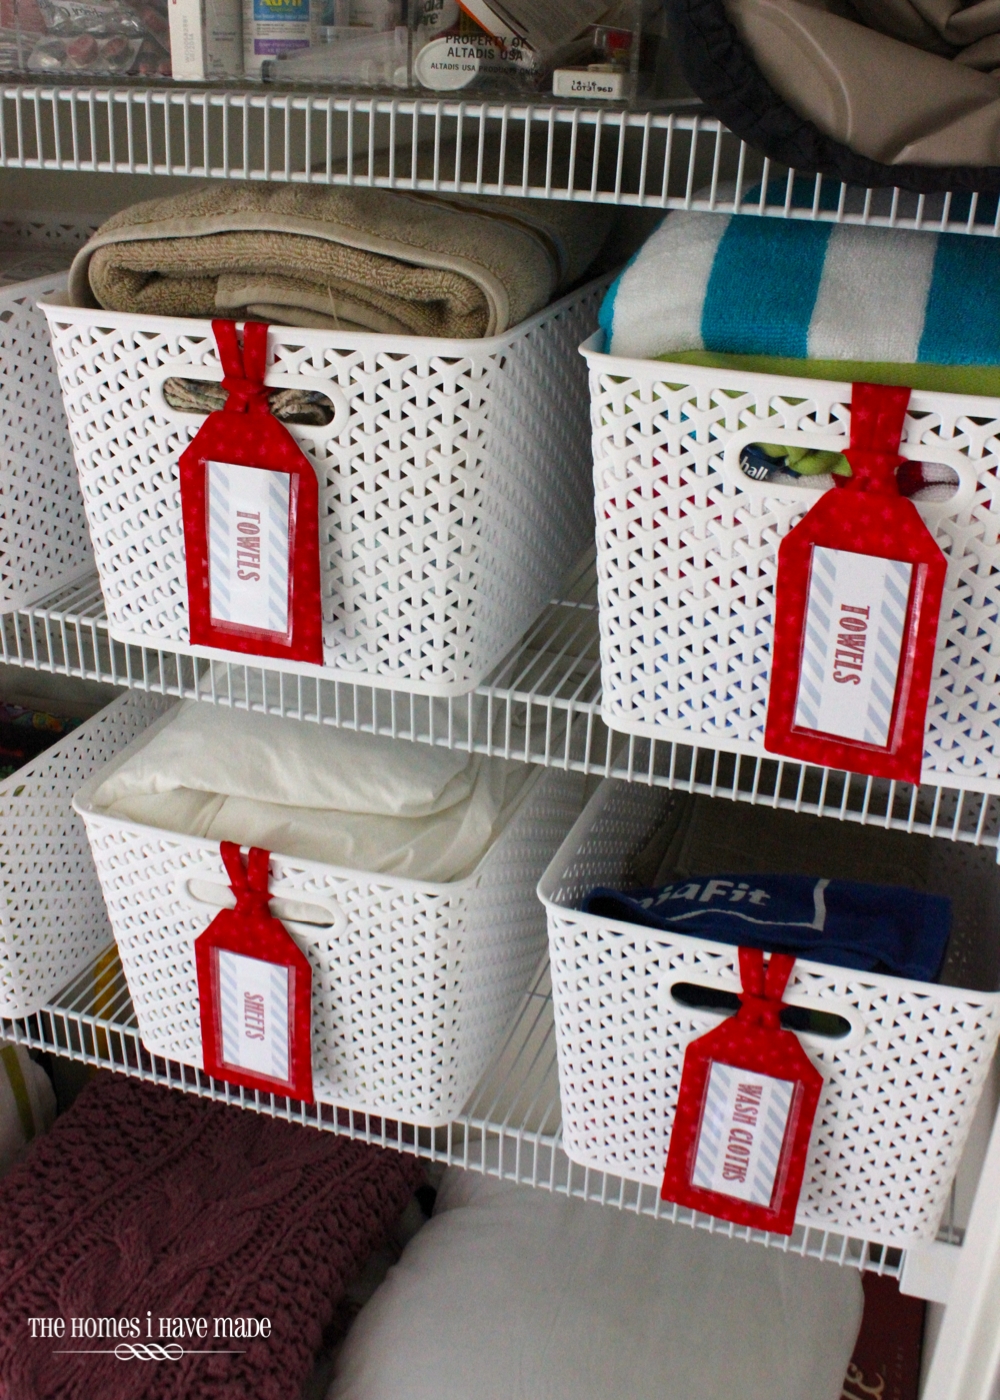 Linen Closet Labels (with free printable labels!) The Homes I Have Made